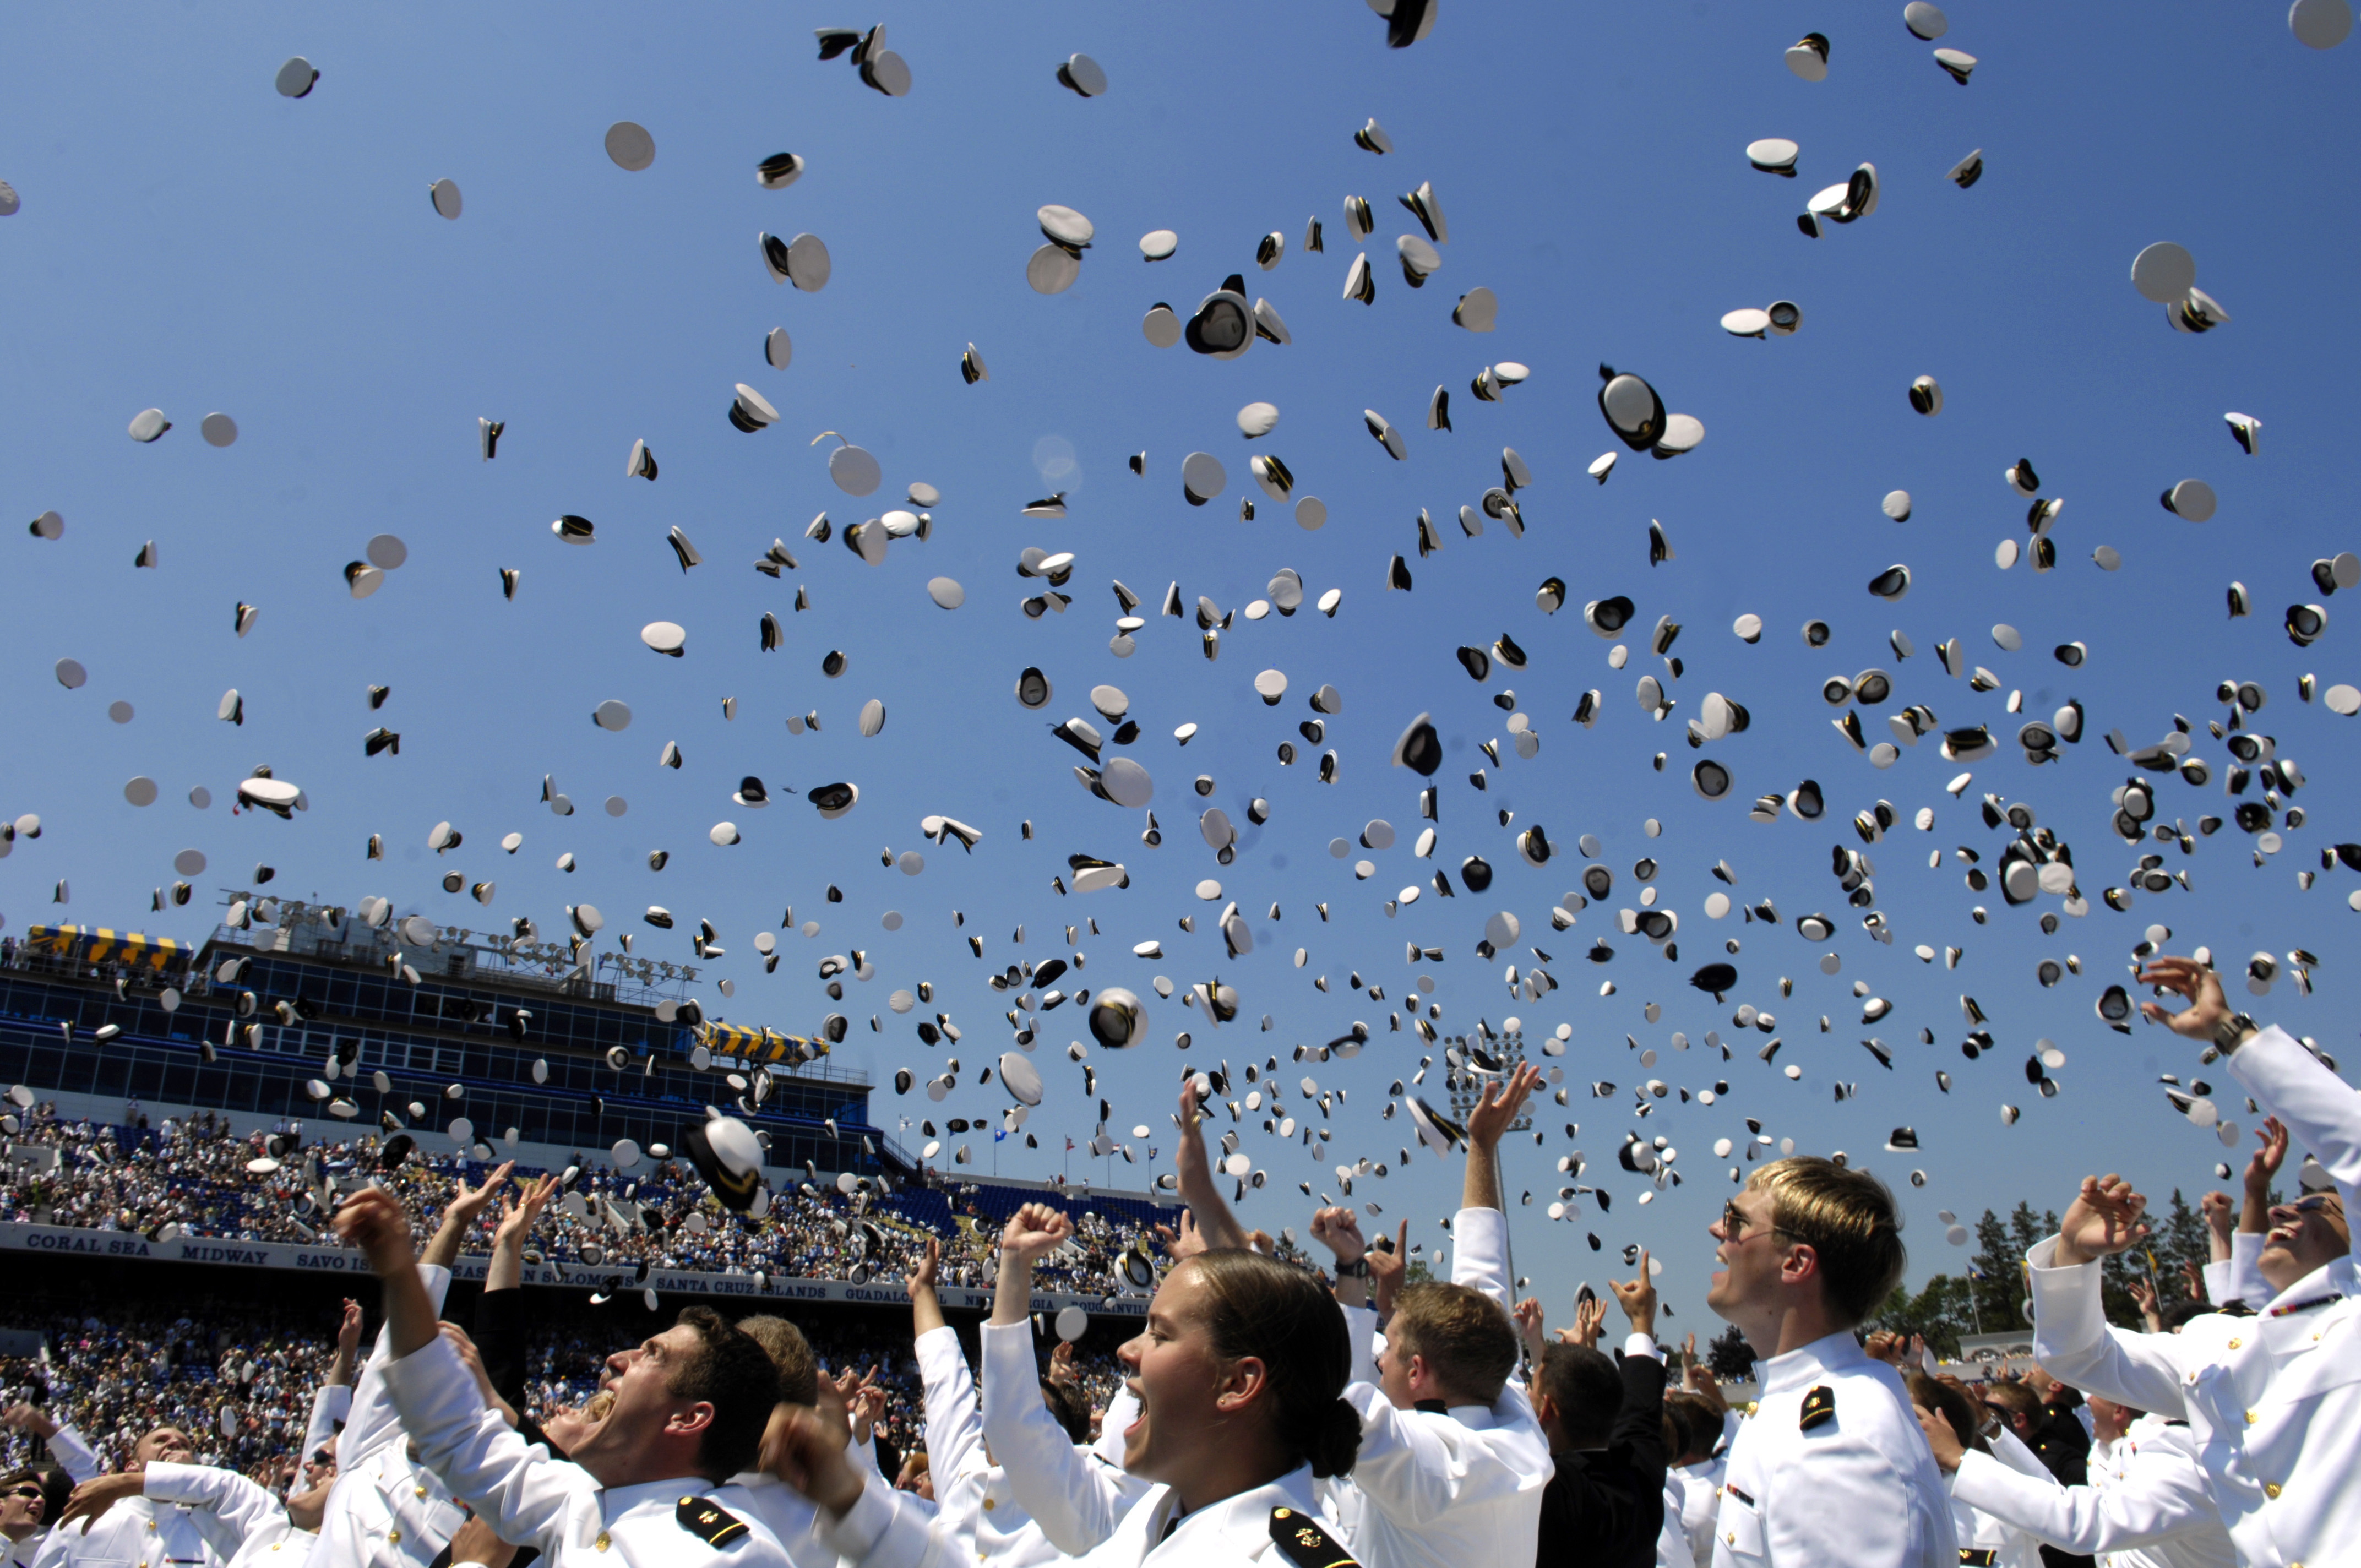 Traditional_hat_toss_celebration_at_graduation_from_United_States_Naval_Academy.jpg